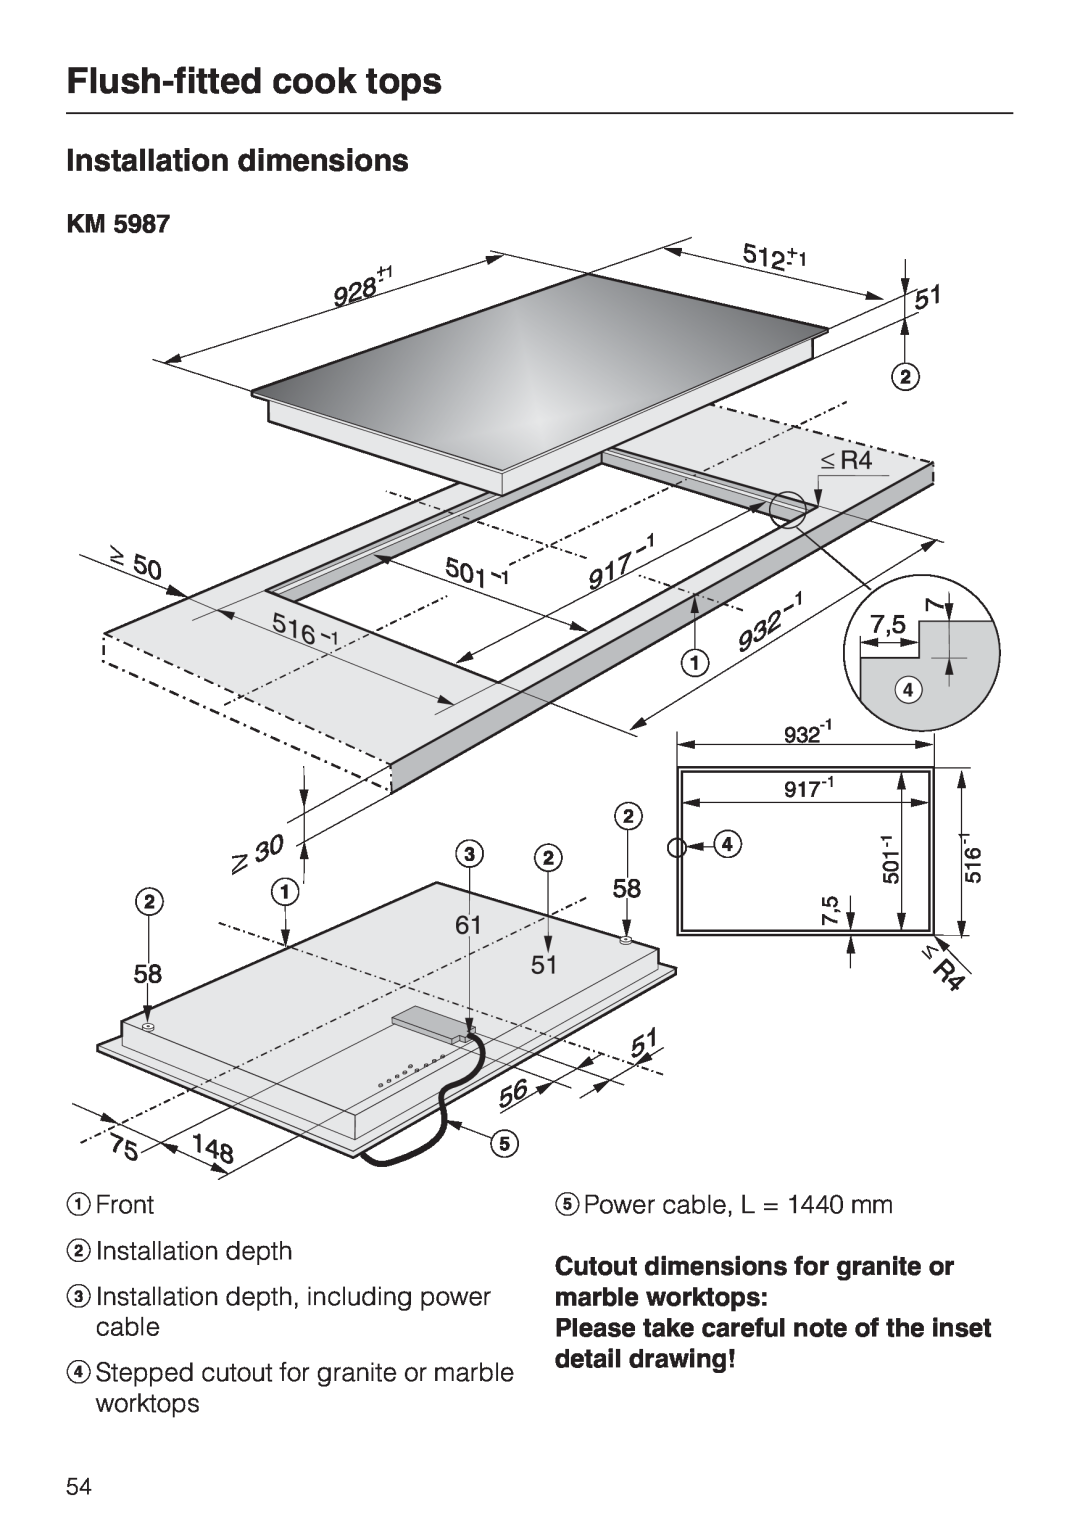 Miele KM 5993, KM 5987 Flush-fittedcook tops, Cutout dimensions for granite or marble worktops, Installation dimensions 